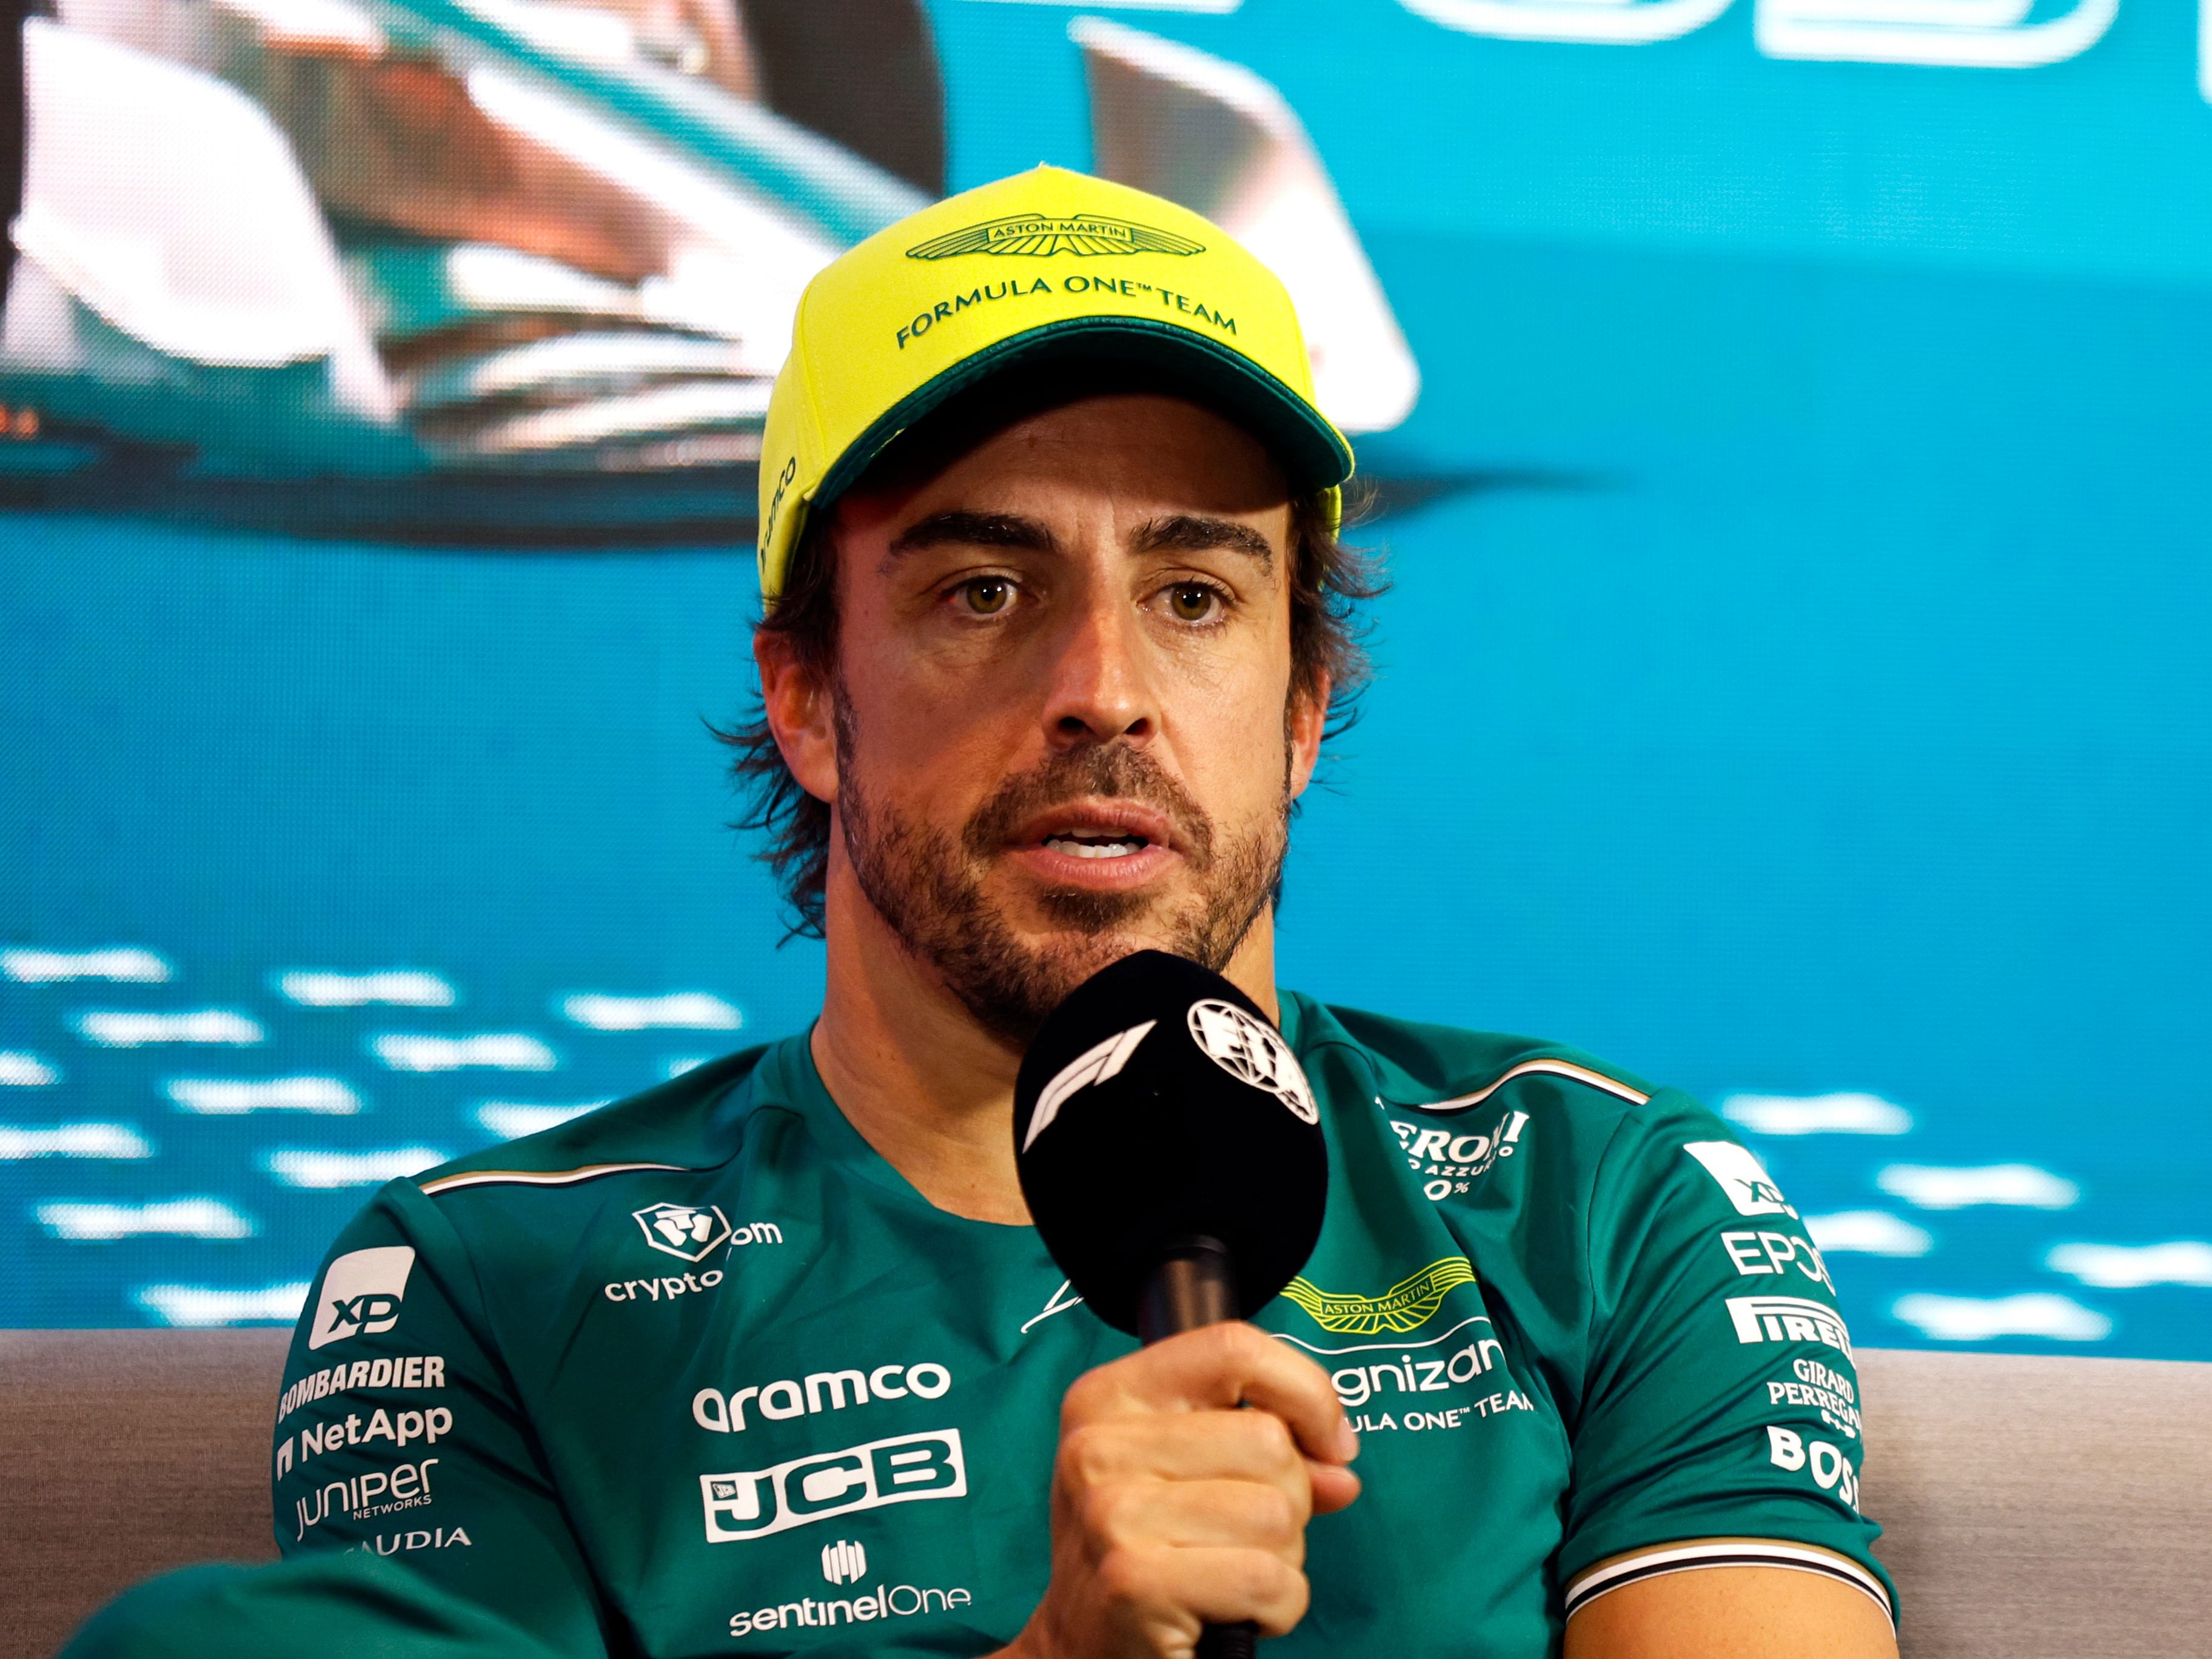 Fernando Alonso attend the press conference after the 2023 F1 Miami Grand Prix. (Photo by Jared C. Tilton/Getty Images)